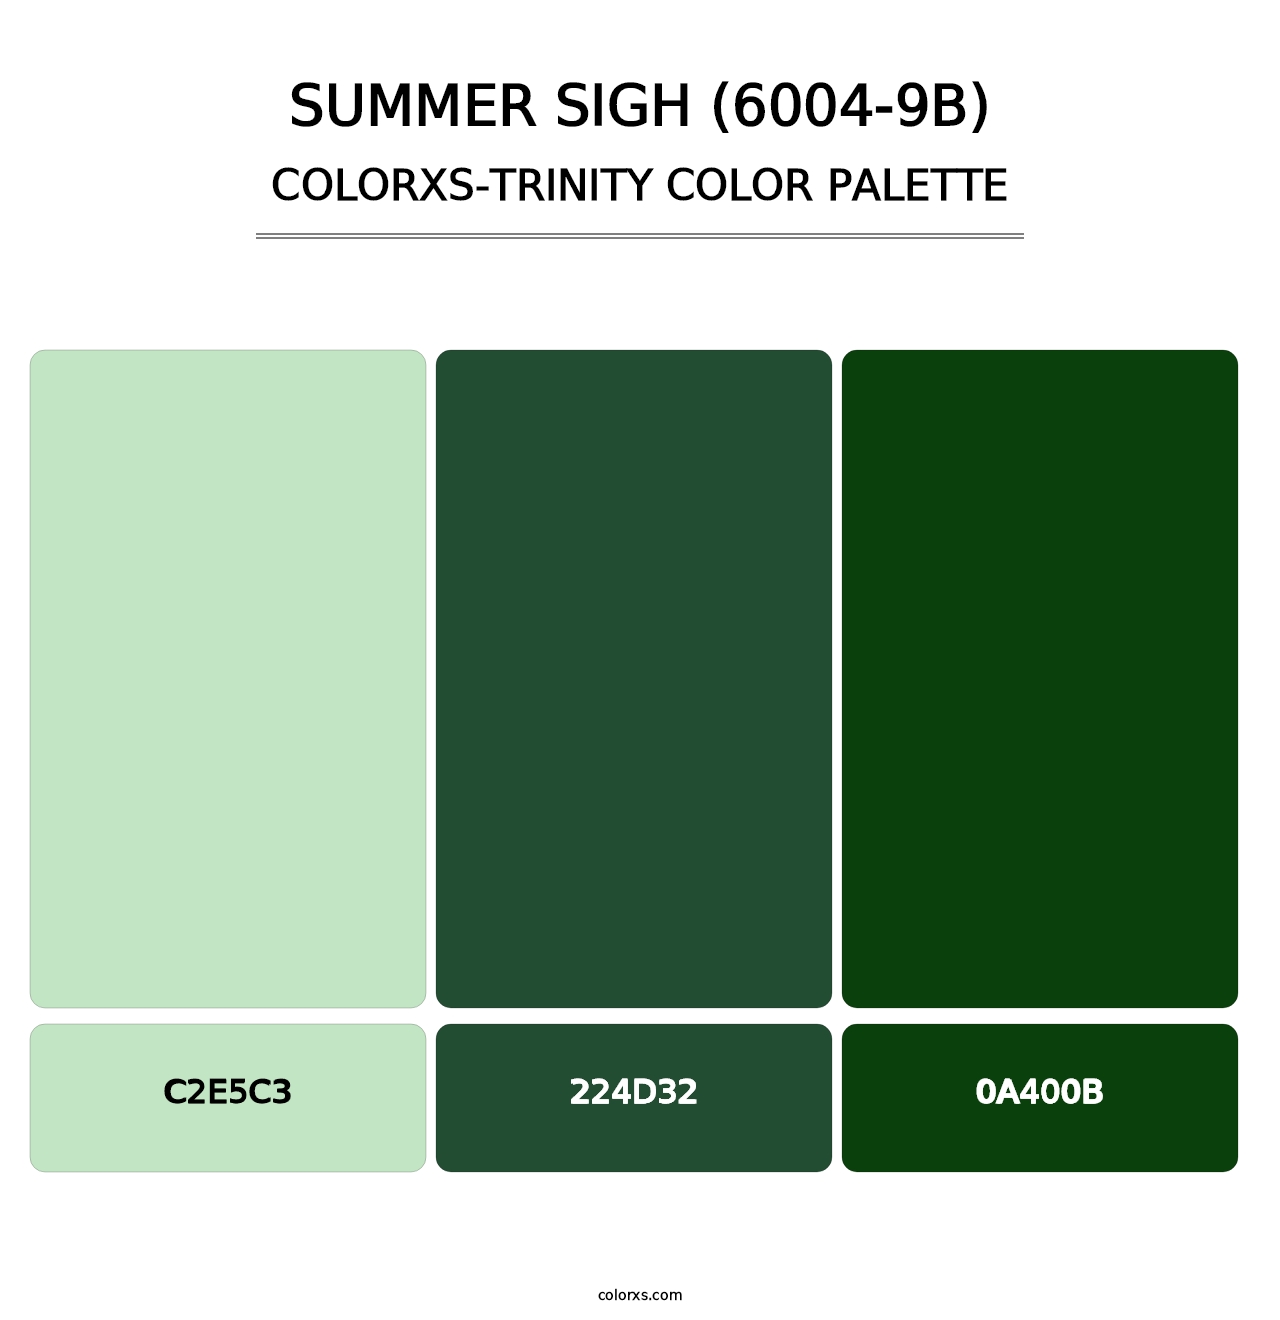 Summer Sigh (6004-9B) - Colorxs Trinity Palette